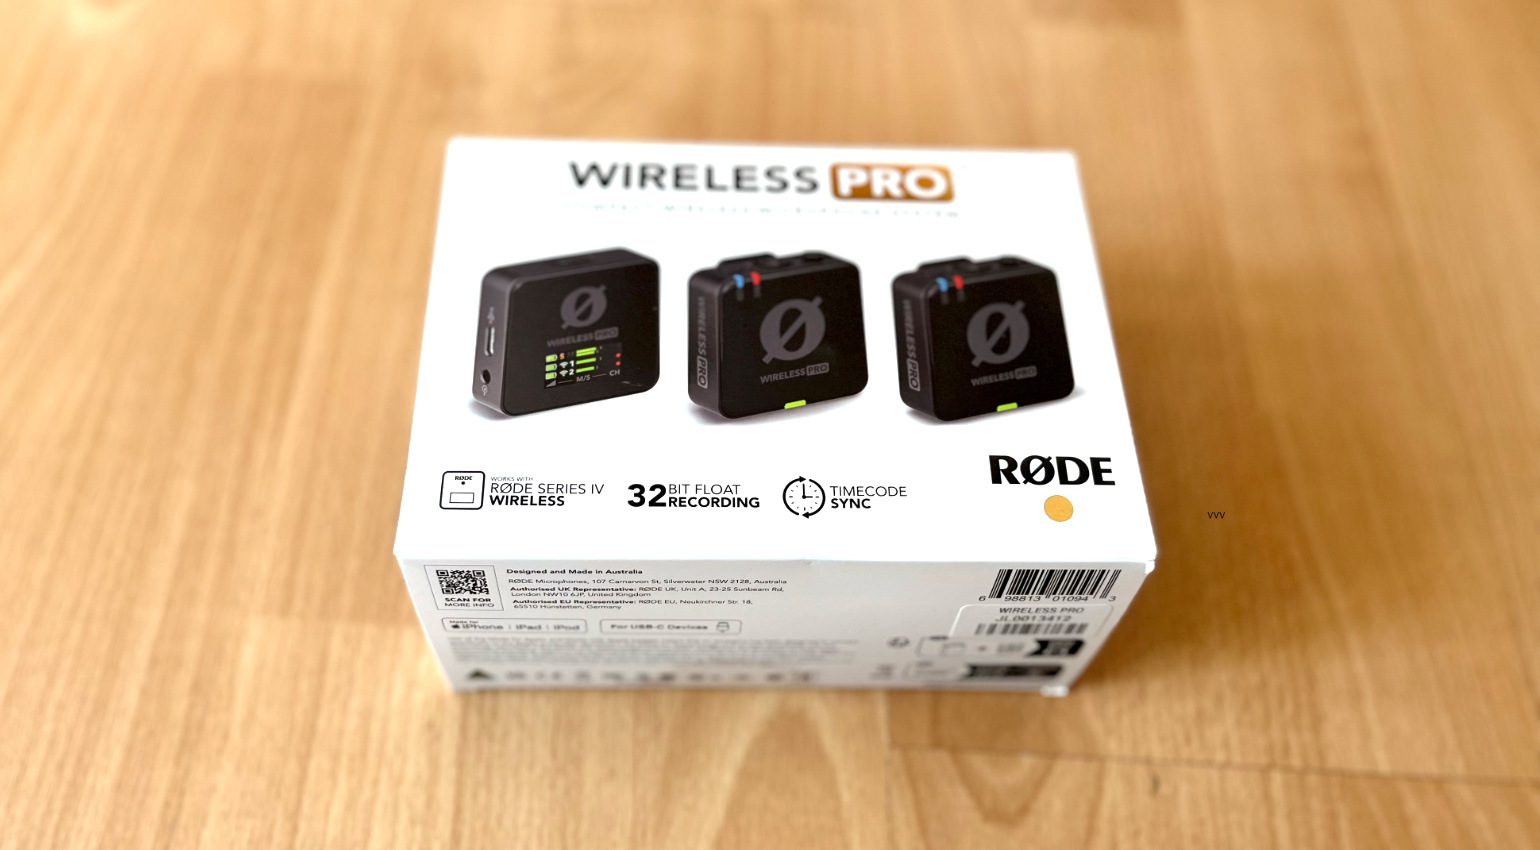 Rode Wireless Pro Review: 32-bit, Timecode - enough to be pro? 